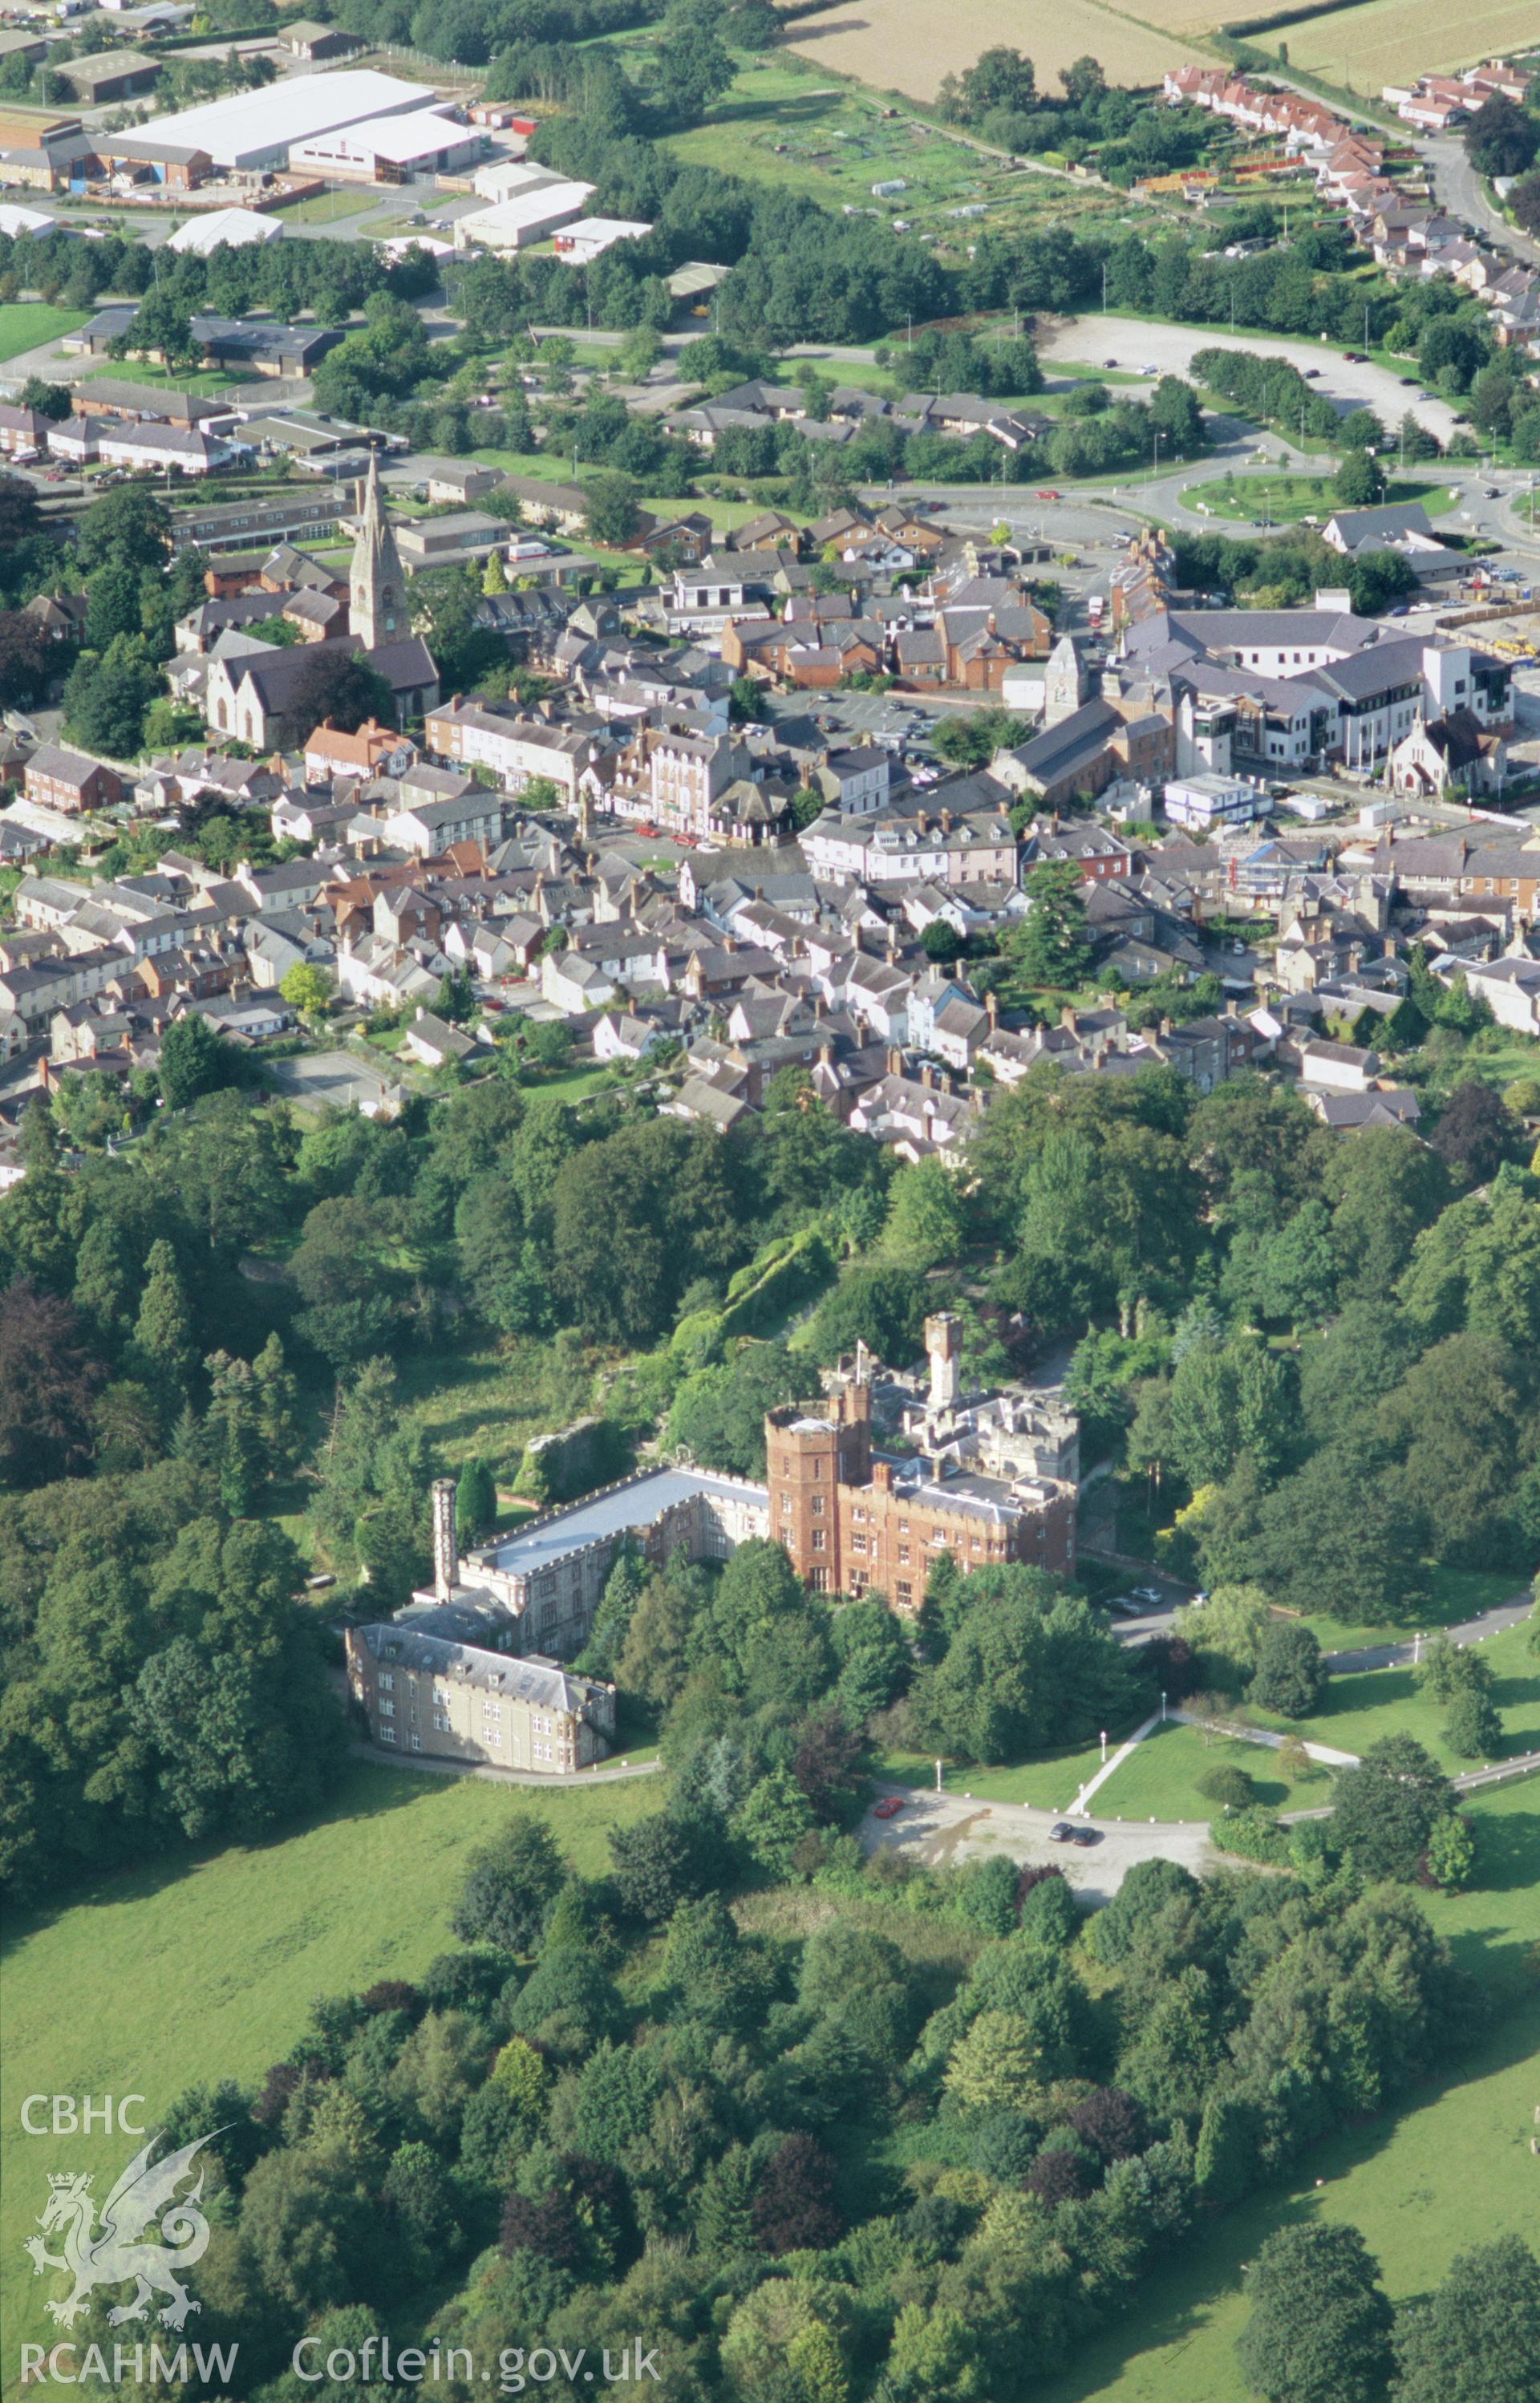 Slide of RCAHMW colour oblique aerial photograph of the Ruthin Castle, taken by Toby Driver, 2004.